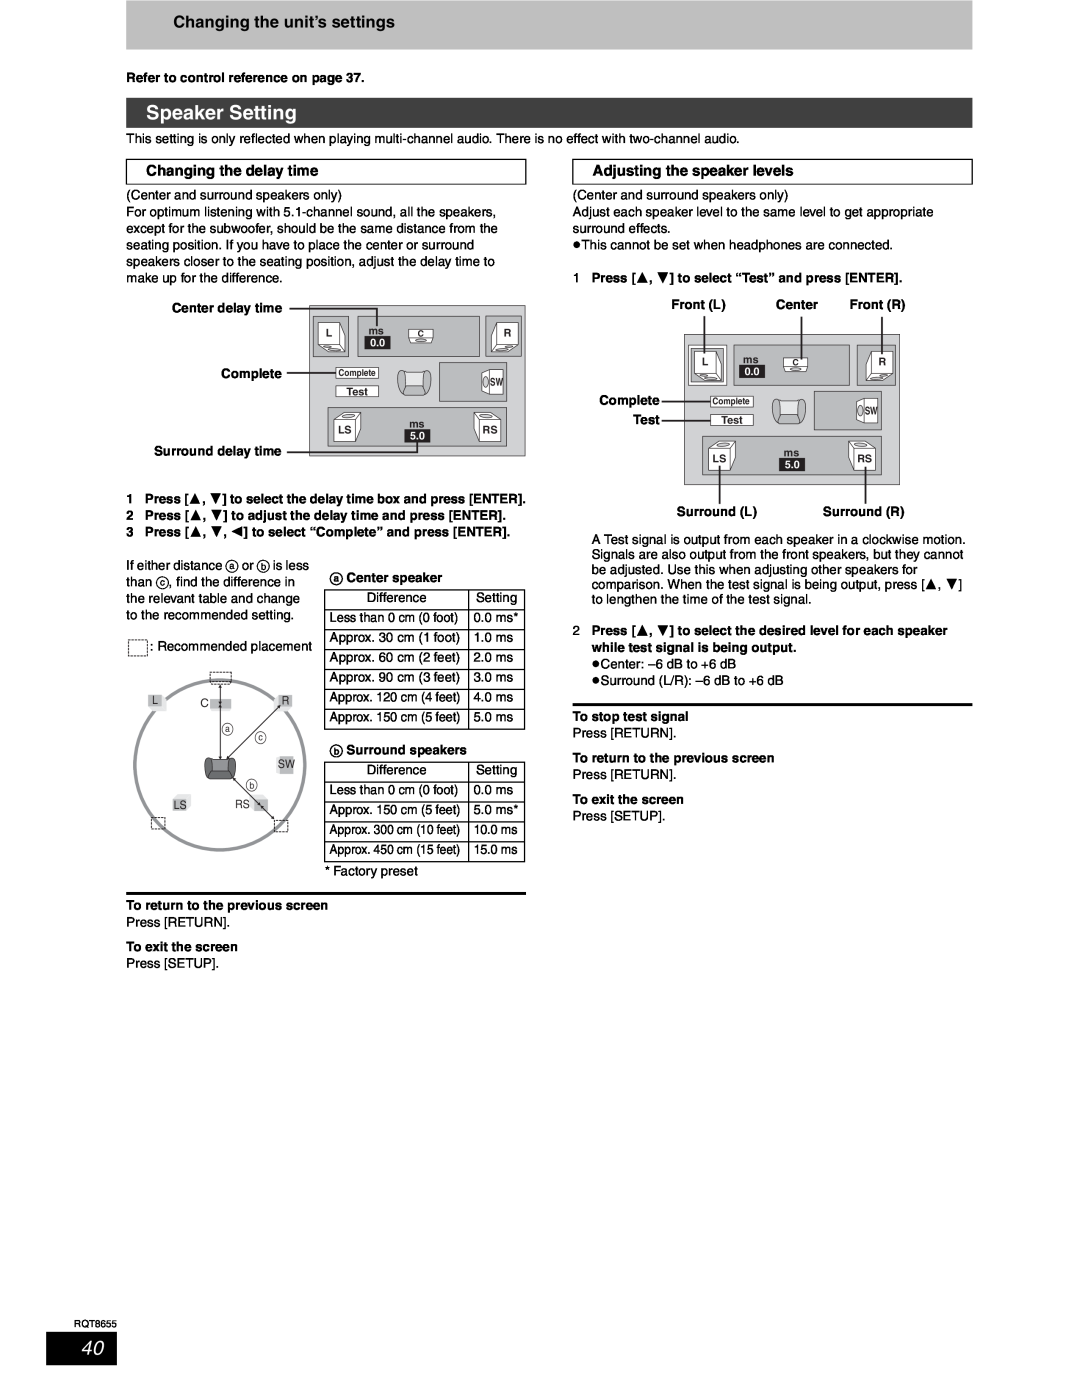 Panasonic SC-RT50 Speaker Setting, Changing the unit’s settings, Changing the delay time, Adjusting the speaker levels 